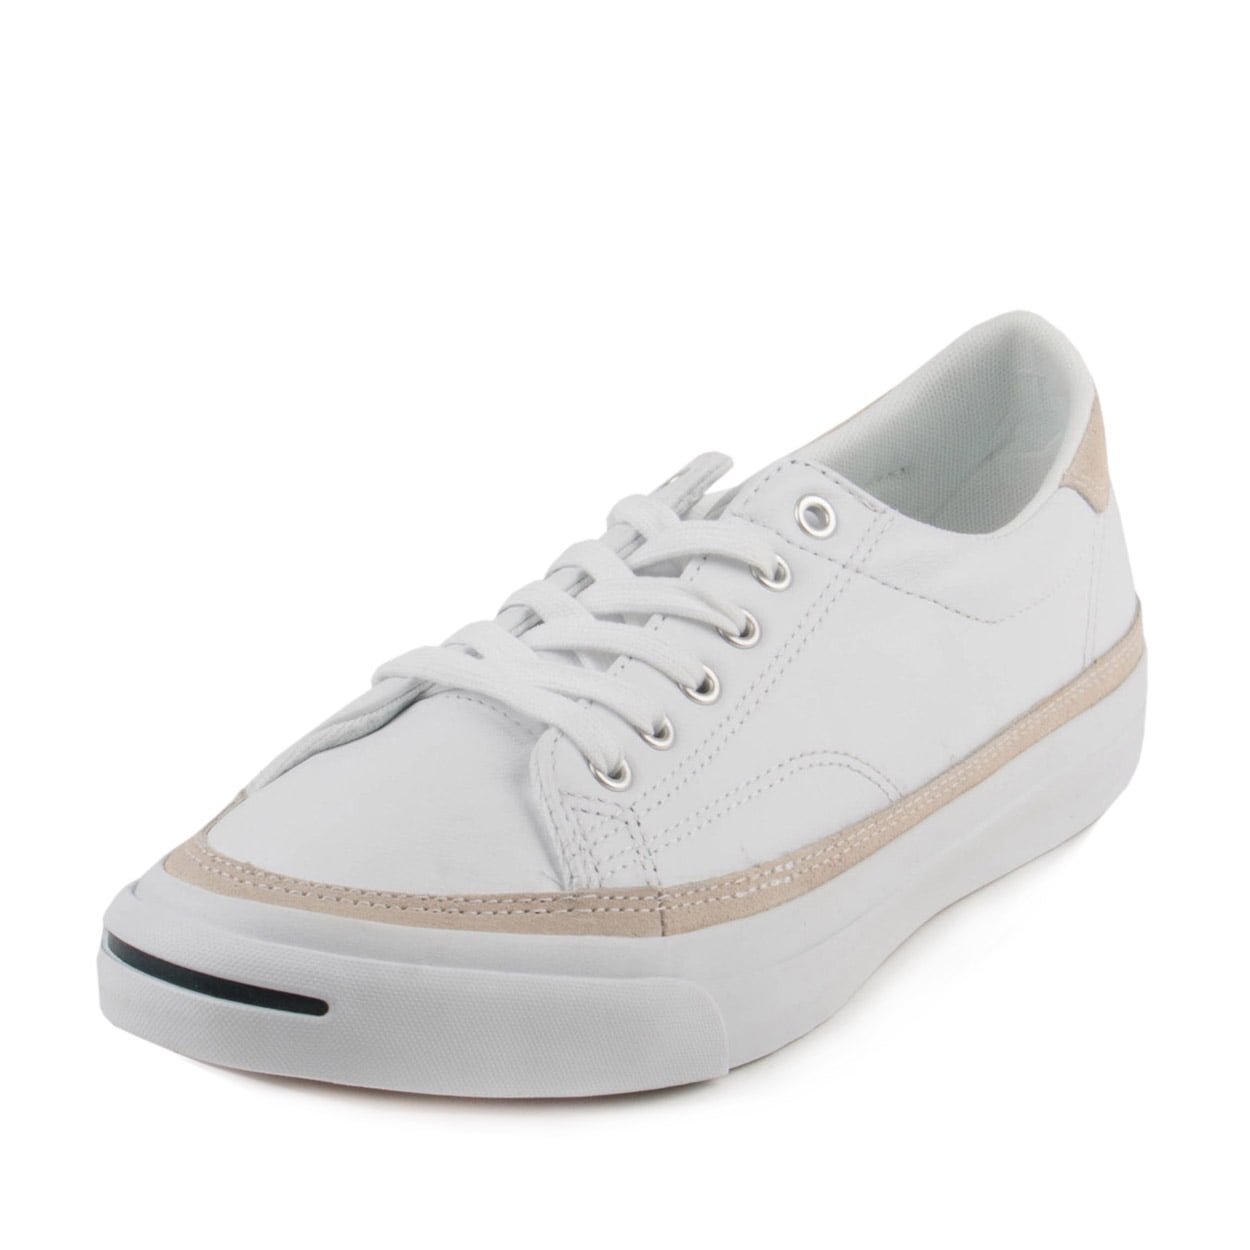 converse jack purcell ii ox